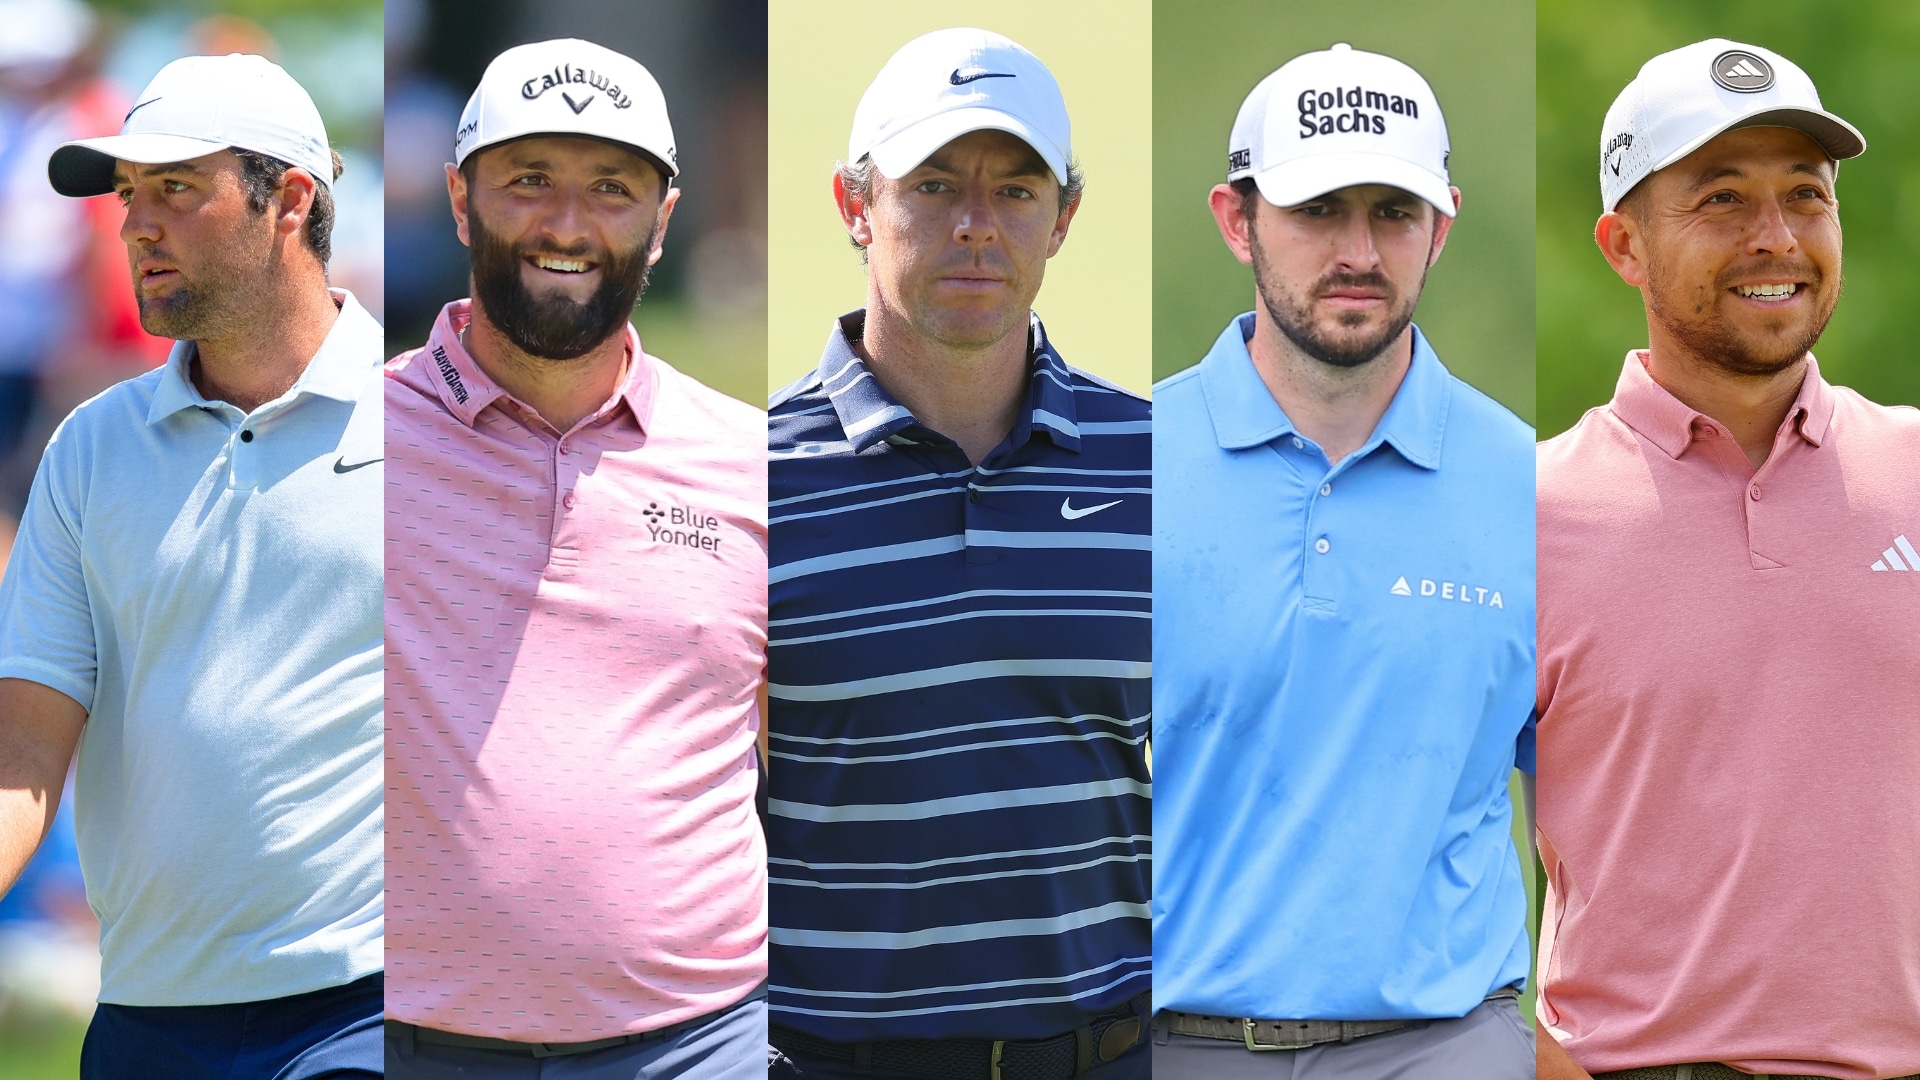 Assessing the world’s top 5 players ahead of the U.S. Open